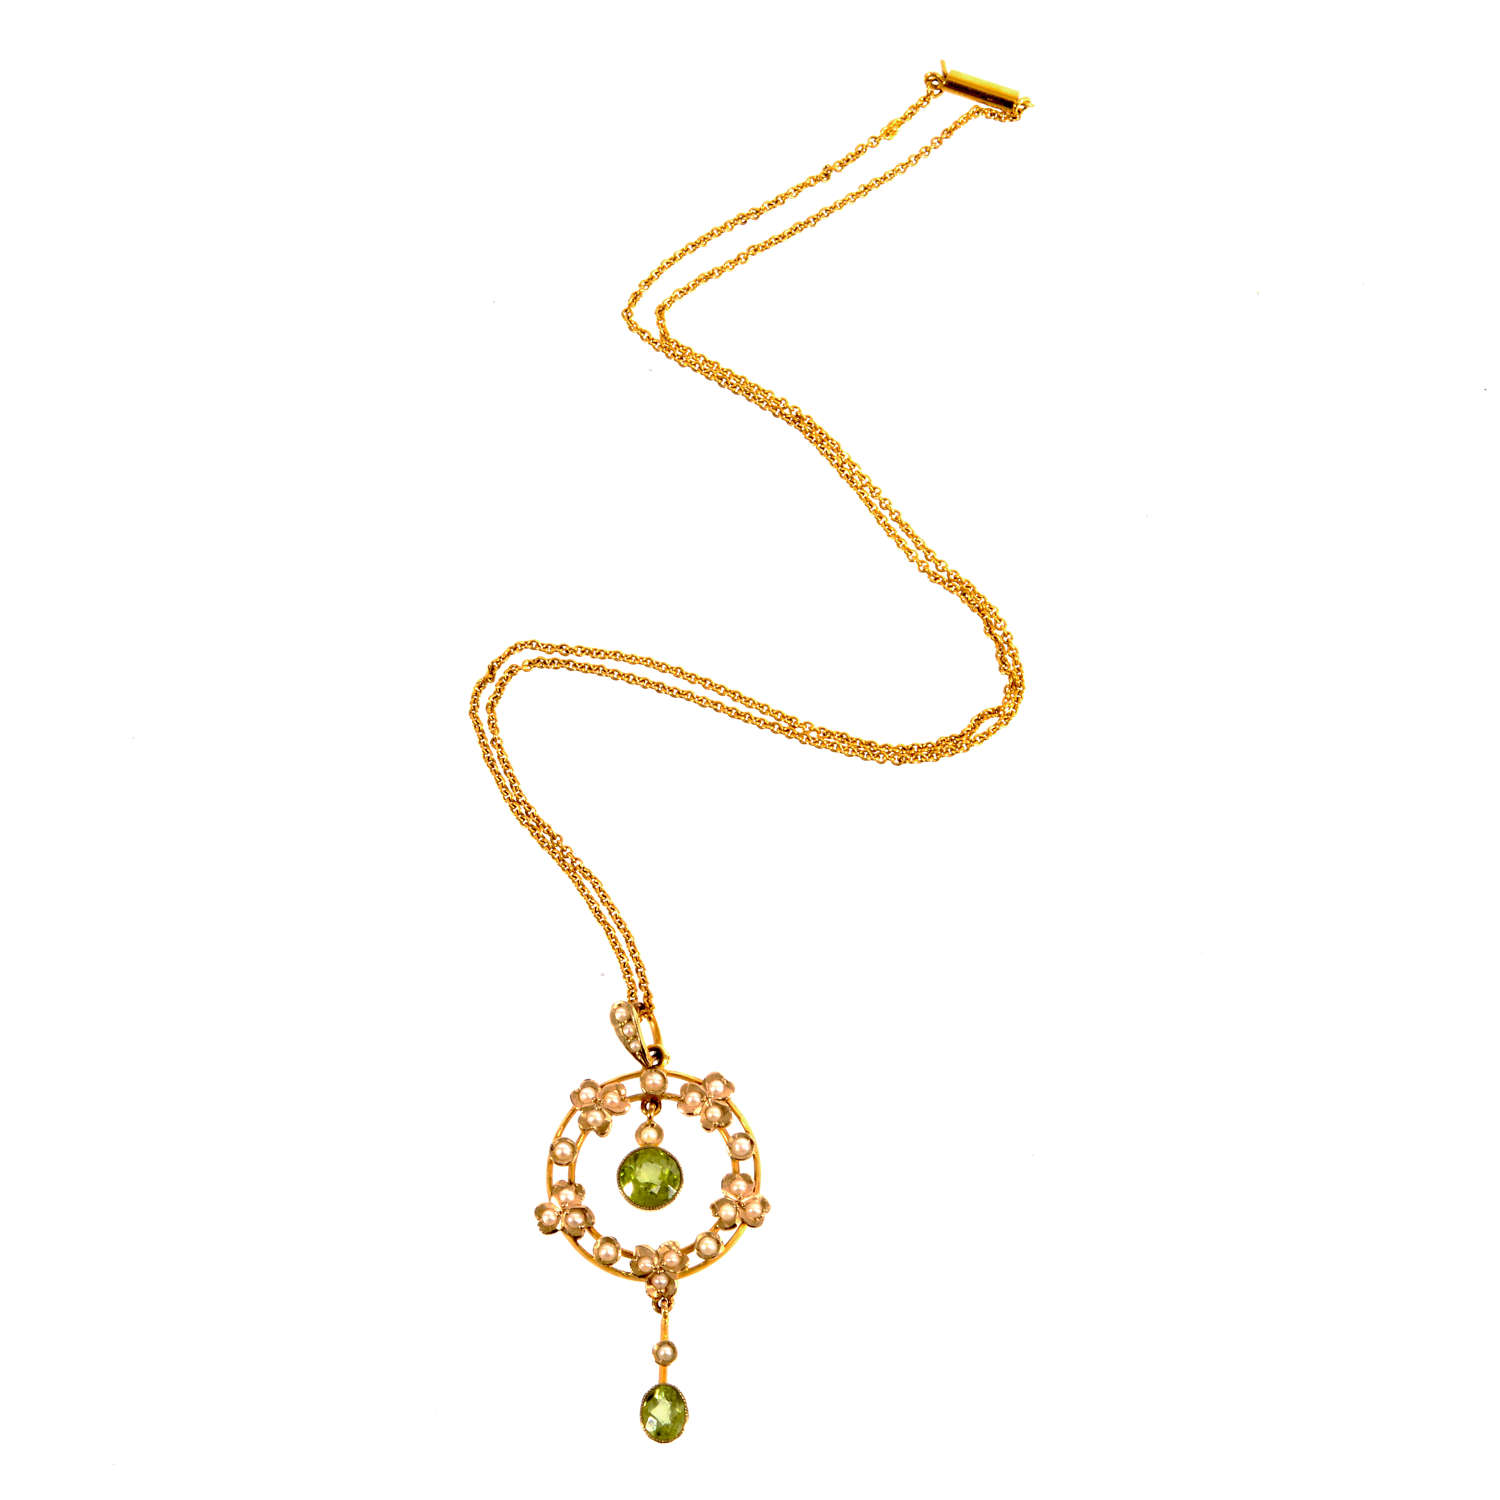 An Edwardian Gold, Peridot and Seed-Pearl Pendant with Chain